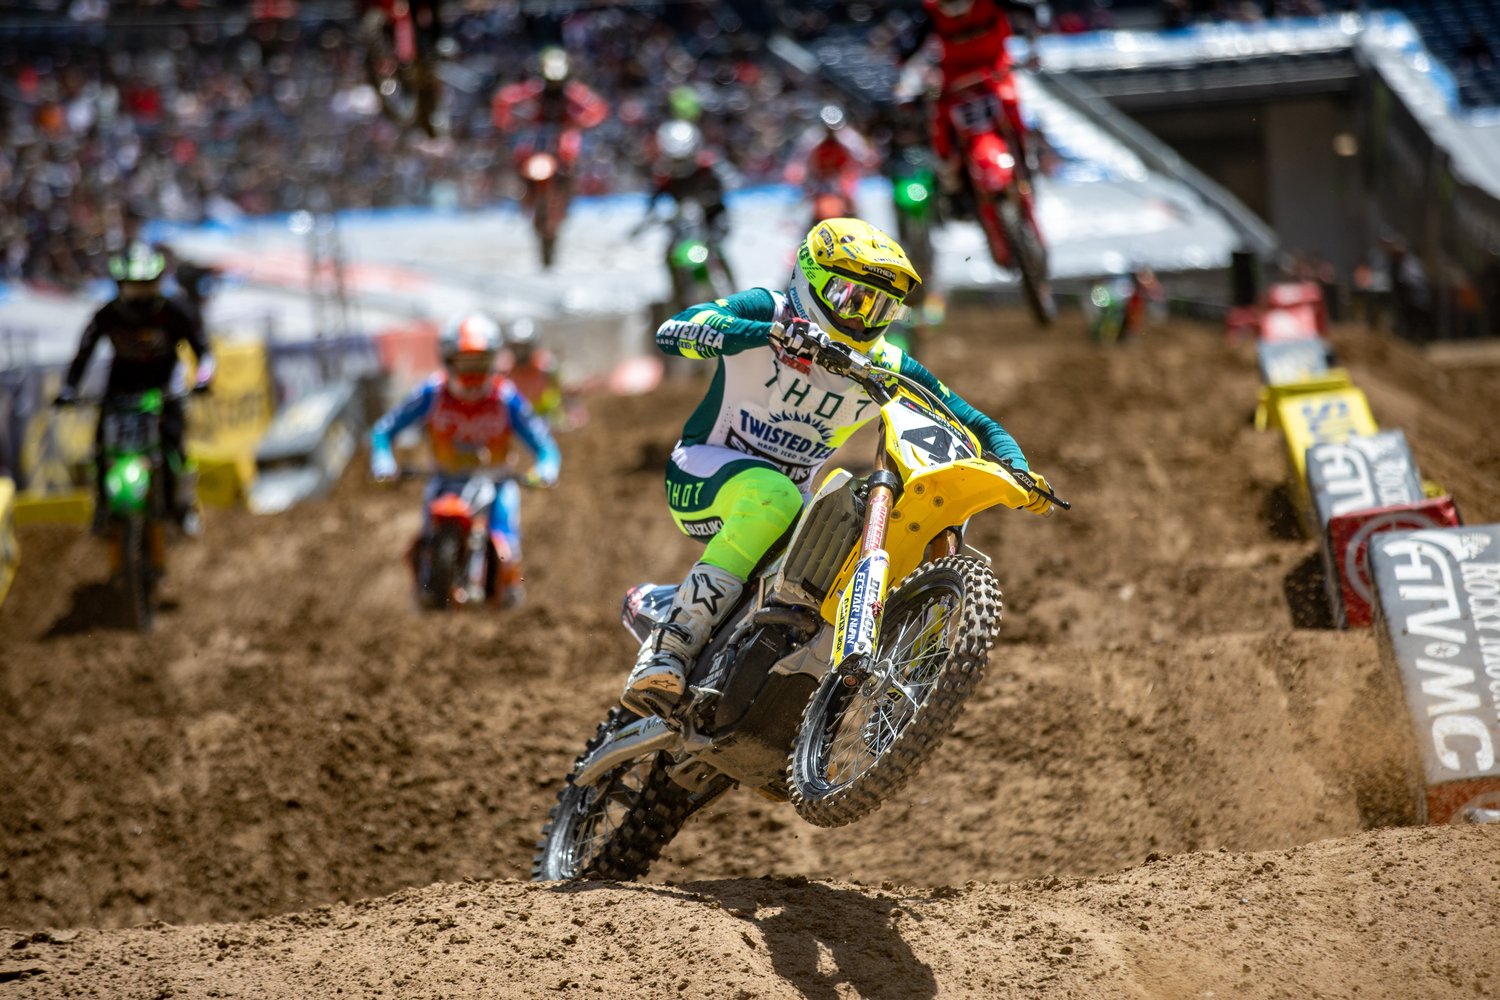 Brandon Hartranft (#41) – finished 11th overall in the 450cc premiere class.